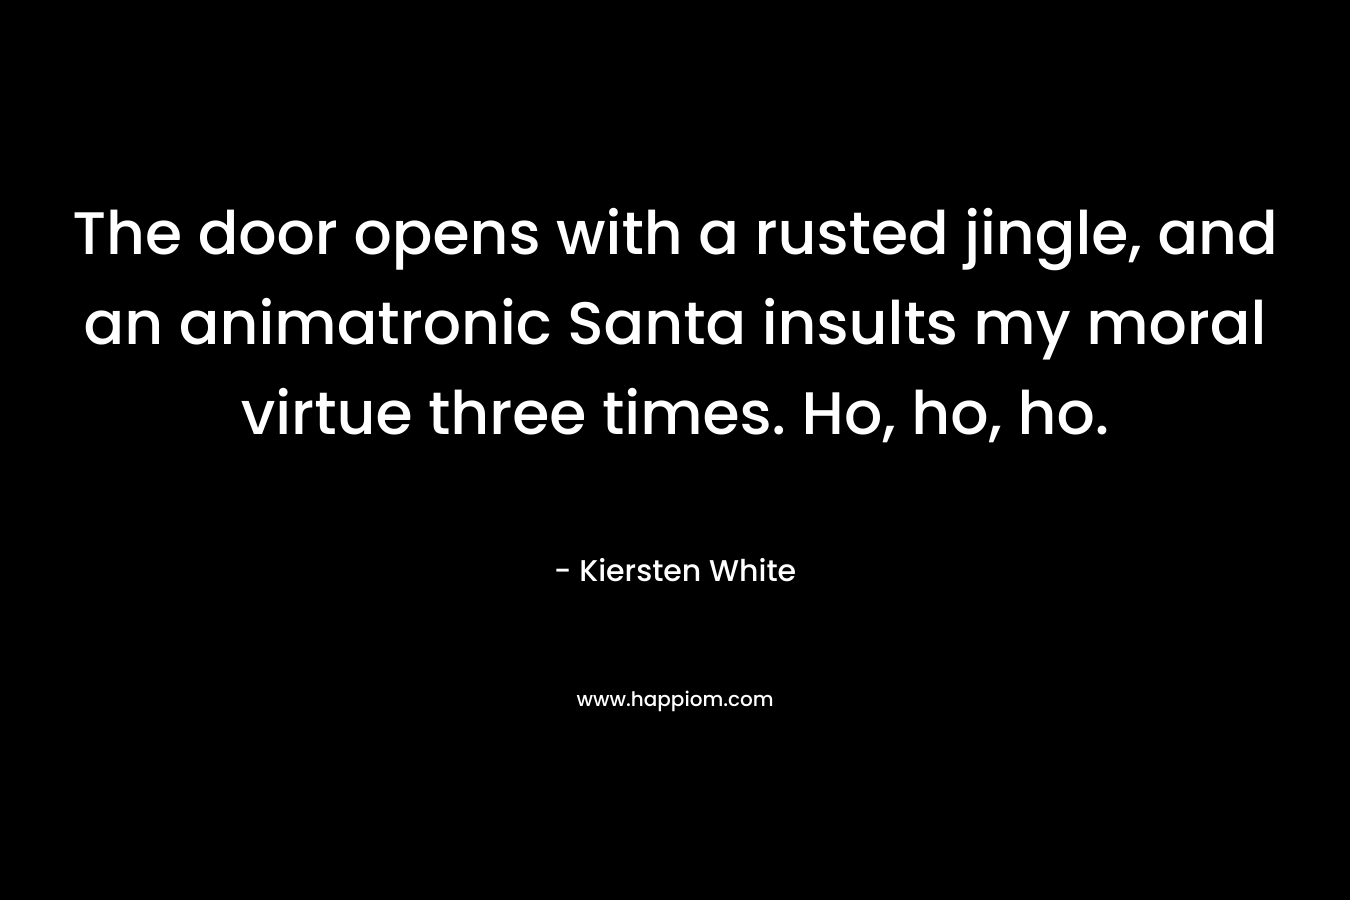 The door opens with a rusted jingle, and an animatronic Santa insults my moral virtue three times. Ho, ho, ho.